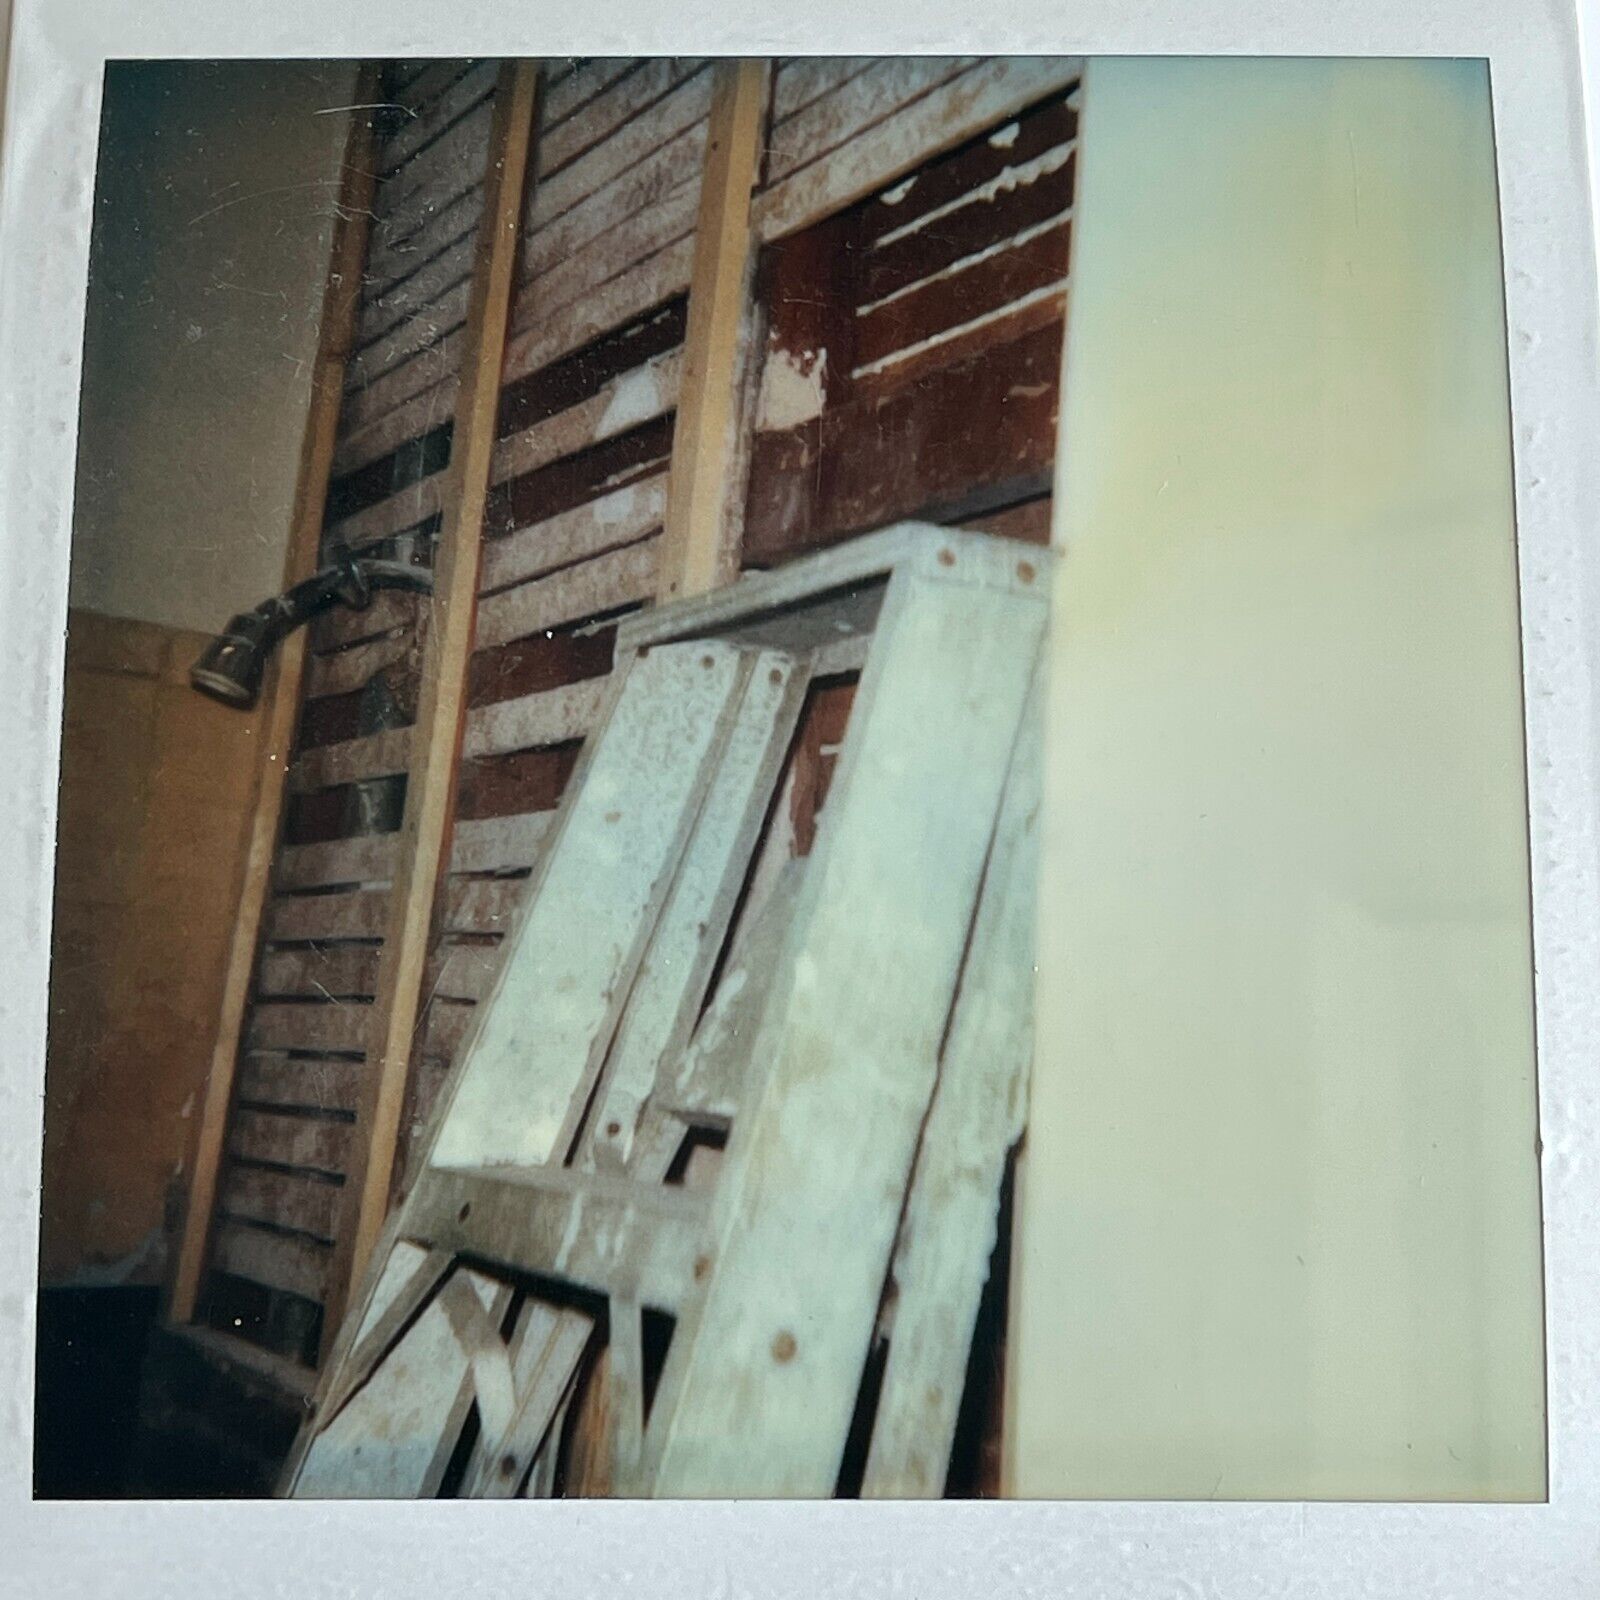 i3 Polaroid Weird Odd Subject Top of Leaning Ladder Construction Abstract Odd 